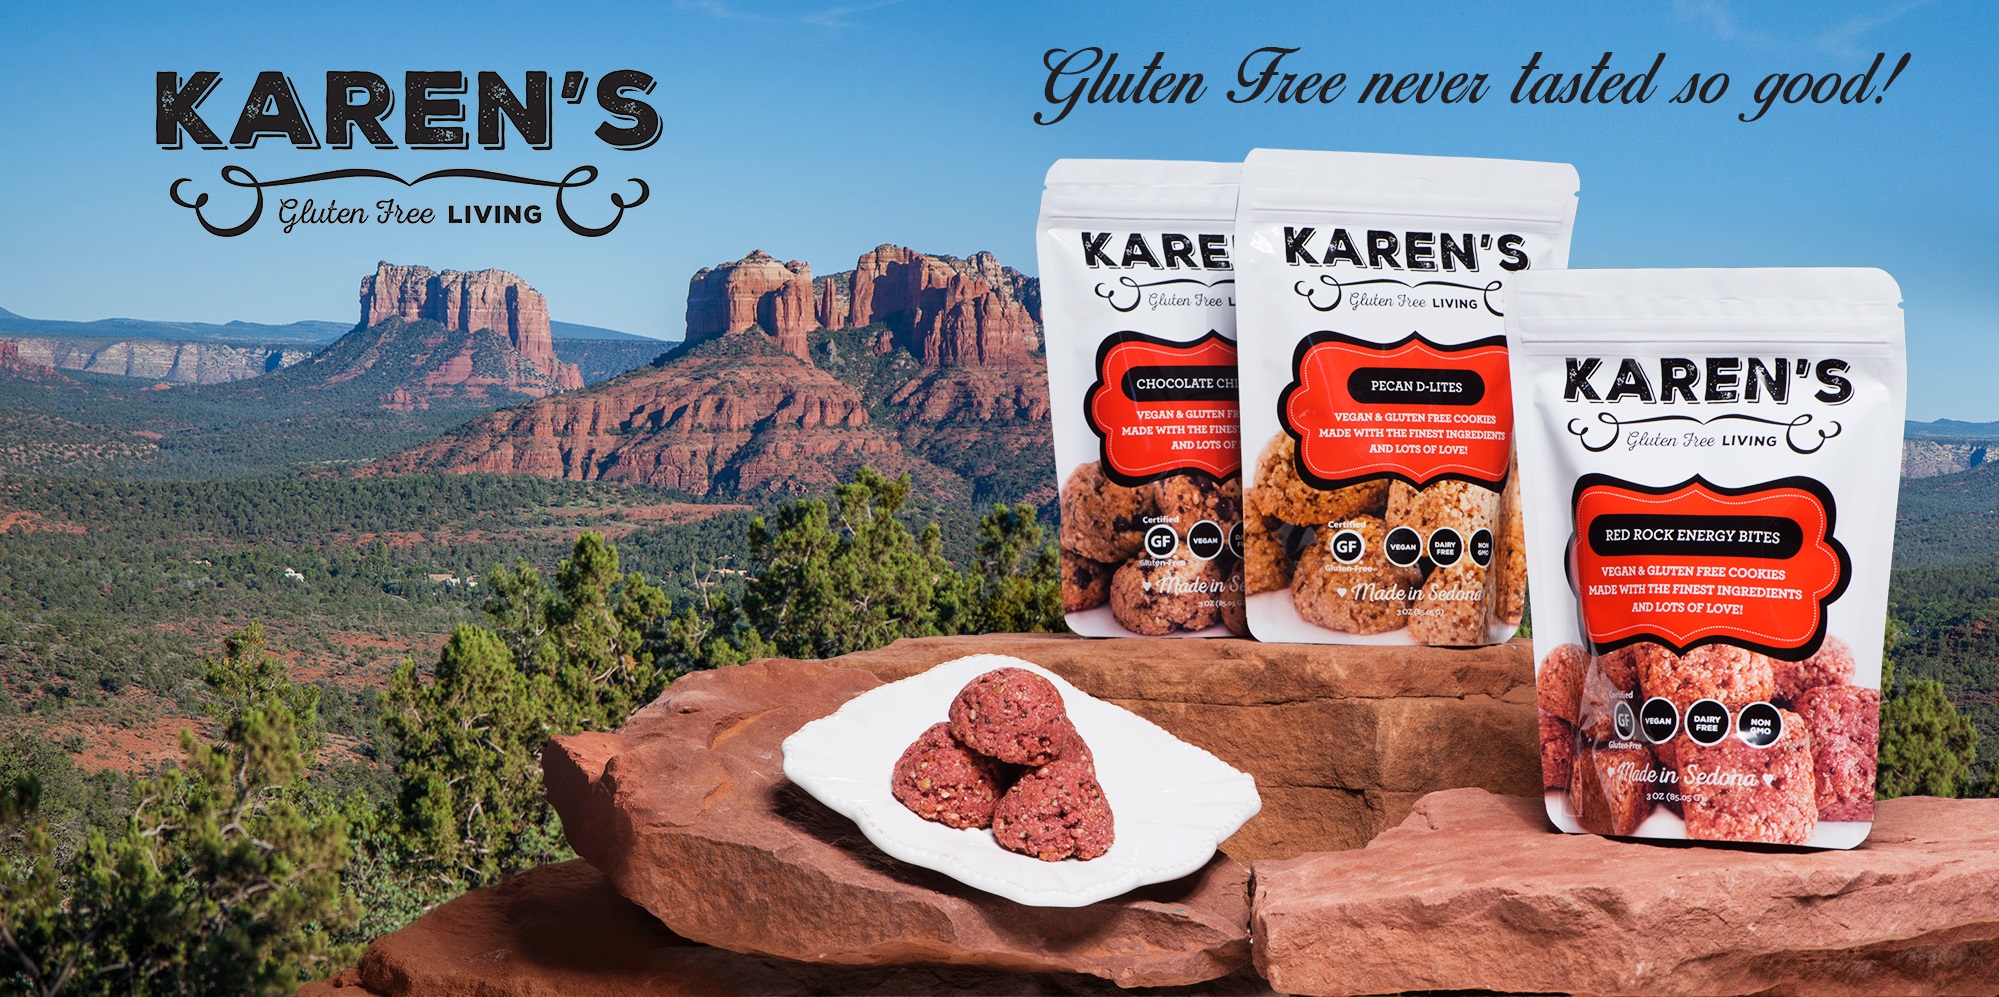 Karen\'s Gluten Free Living is utilizing Mr. Checkout\'s Fast Track Program to reach Independent Grocery Stores Nationwide.